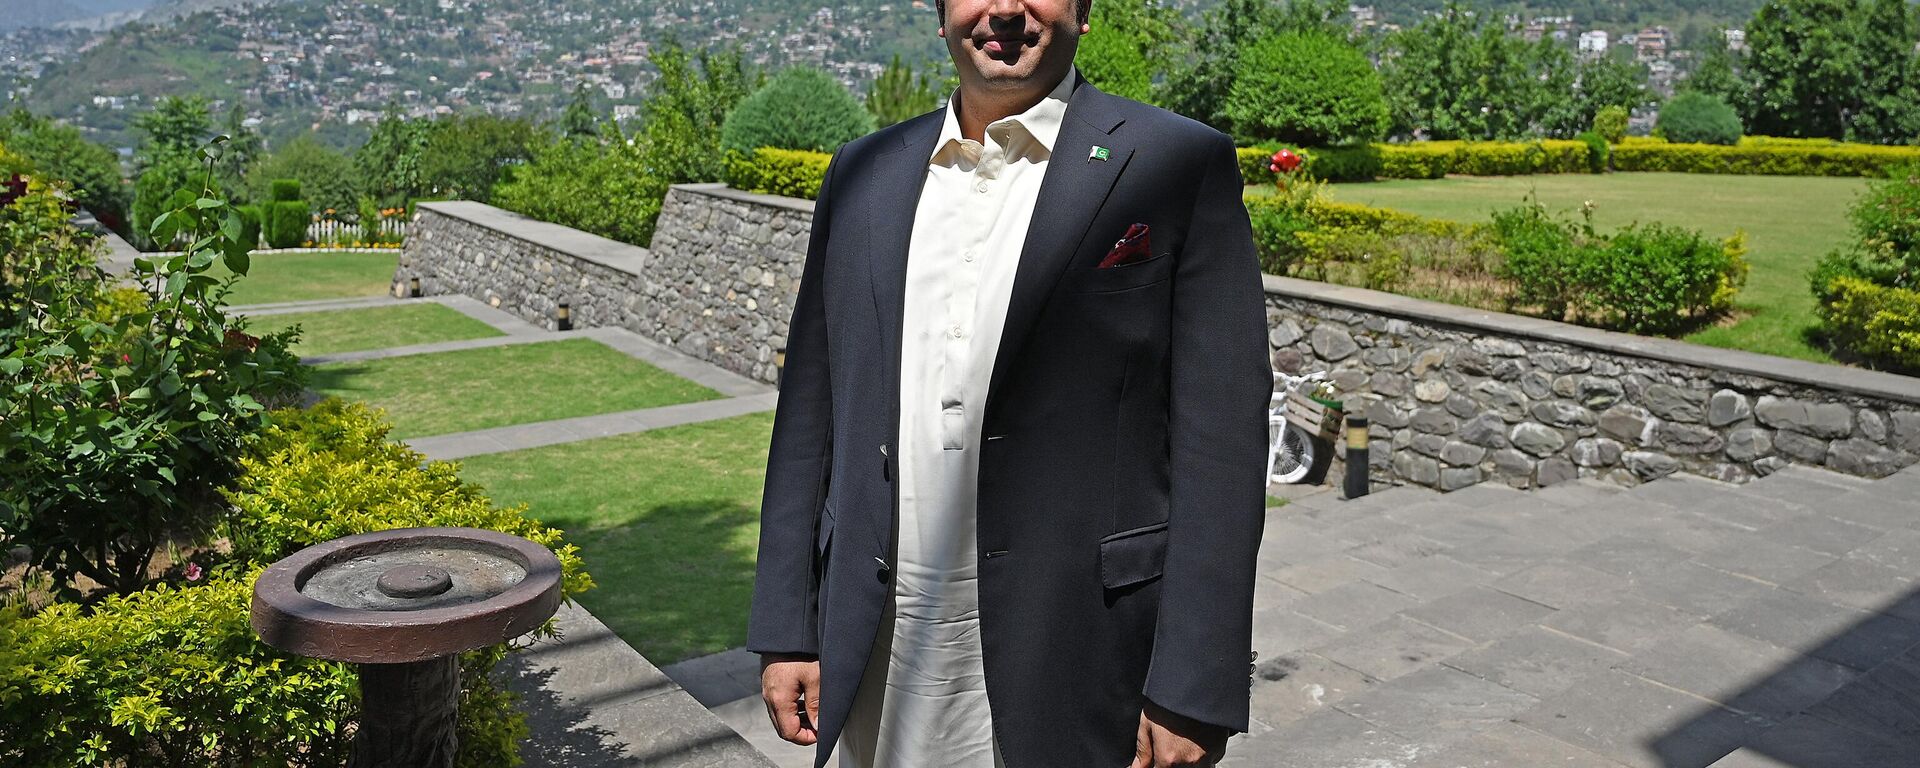 Pakistan's Foreign Minister Bilawal Bhutto Zardari poses after an interview with AFP in Muzaffarabad, the capital of Pakistan-administered Kashmir on May 22, 2023. - Sputnik India, 1920, 22.05.2023